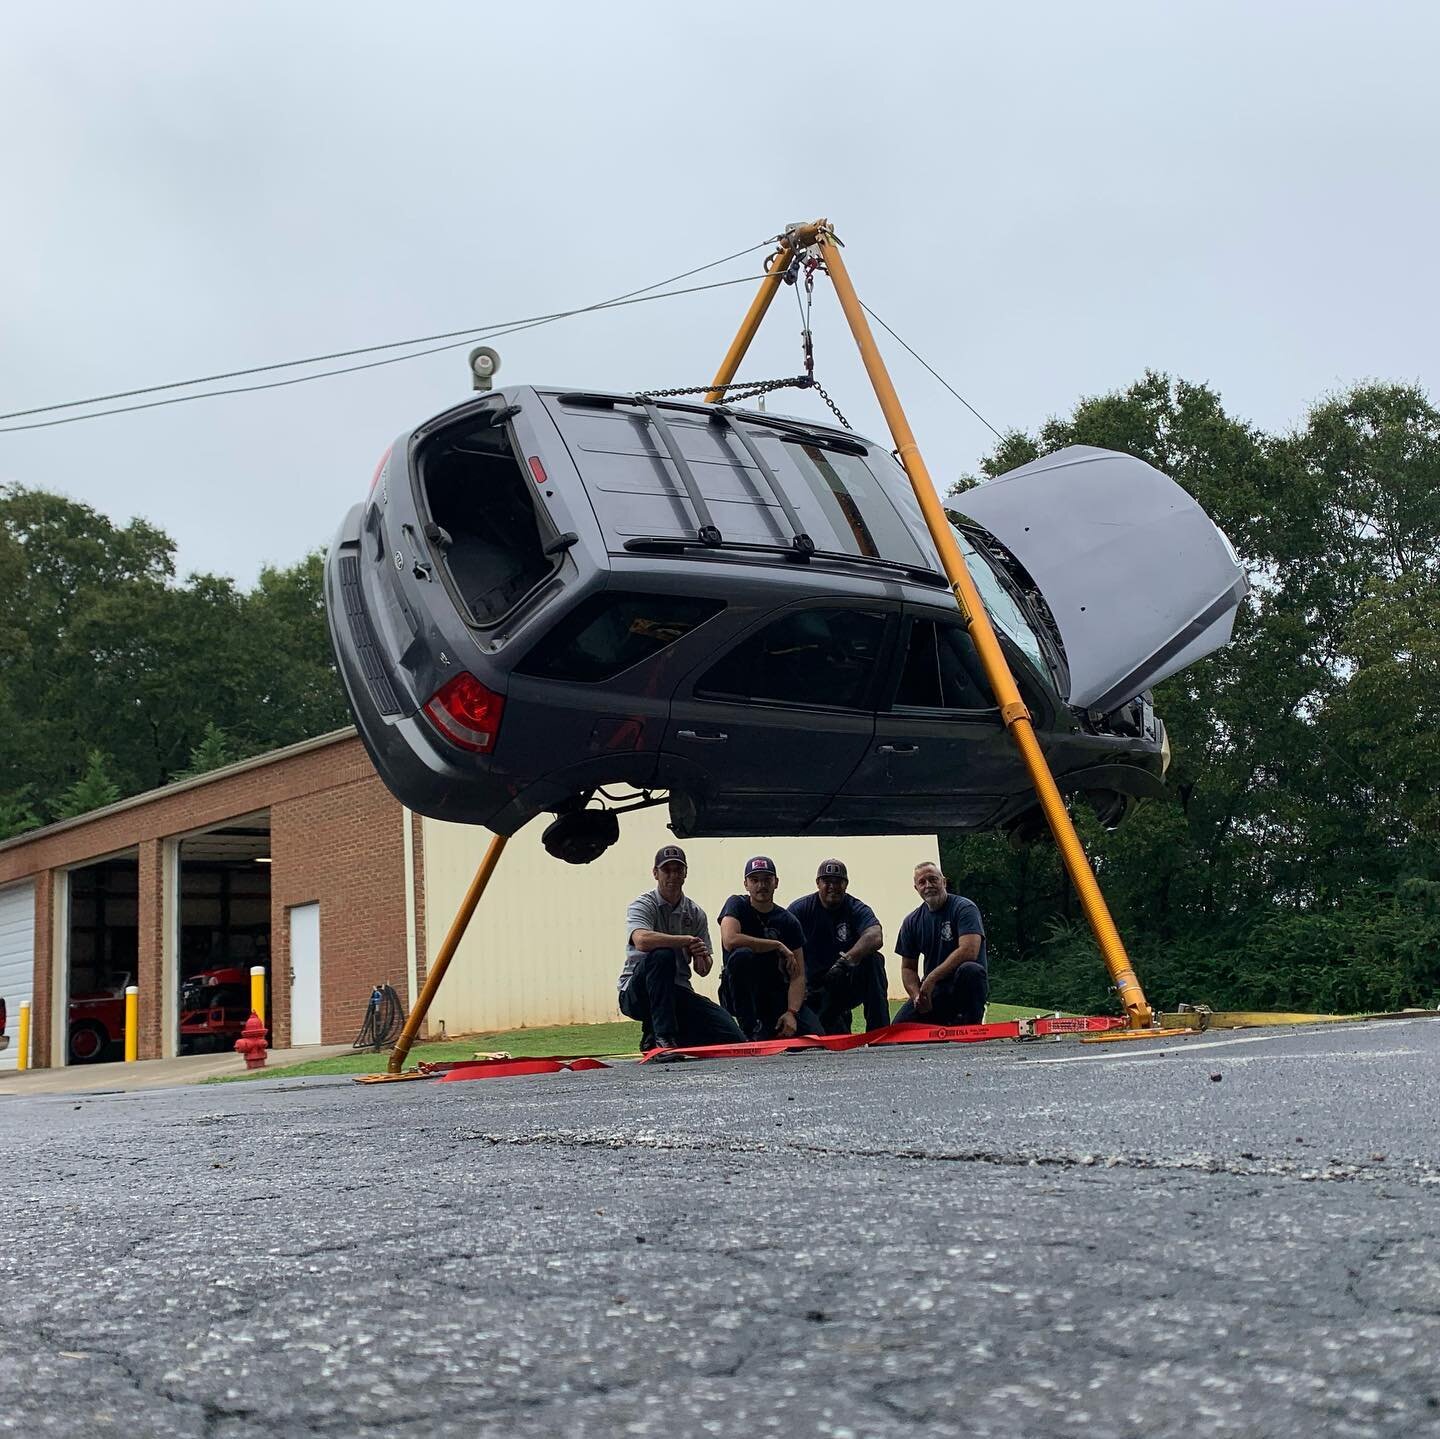 Today, firefighters trained on heavy lifting scenarios using the Paratech Bipod and two Griphoists. The scenario consisted of slinging the vehicle (trying to determine the vehicle&rsquo;s center of gravity, using opposing Griphoists and winch lines t